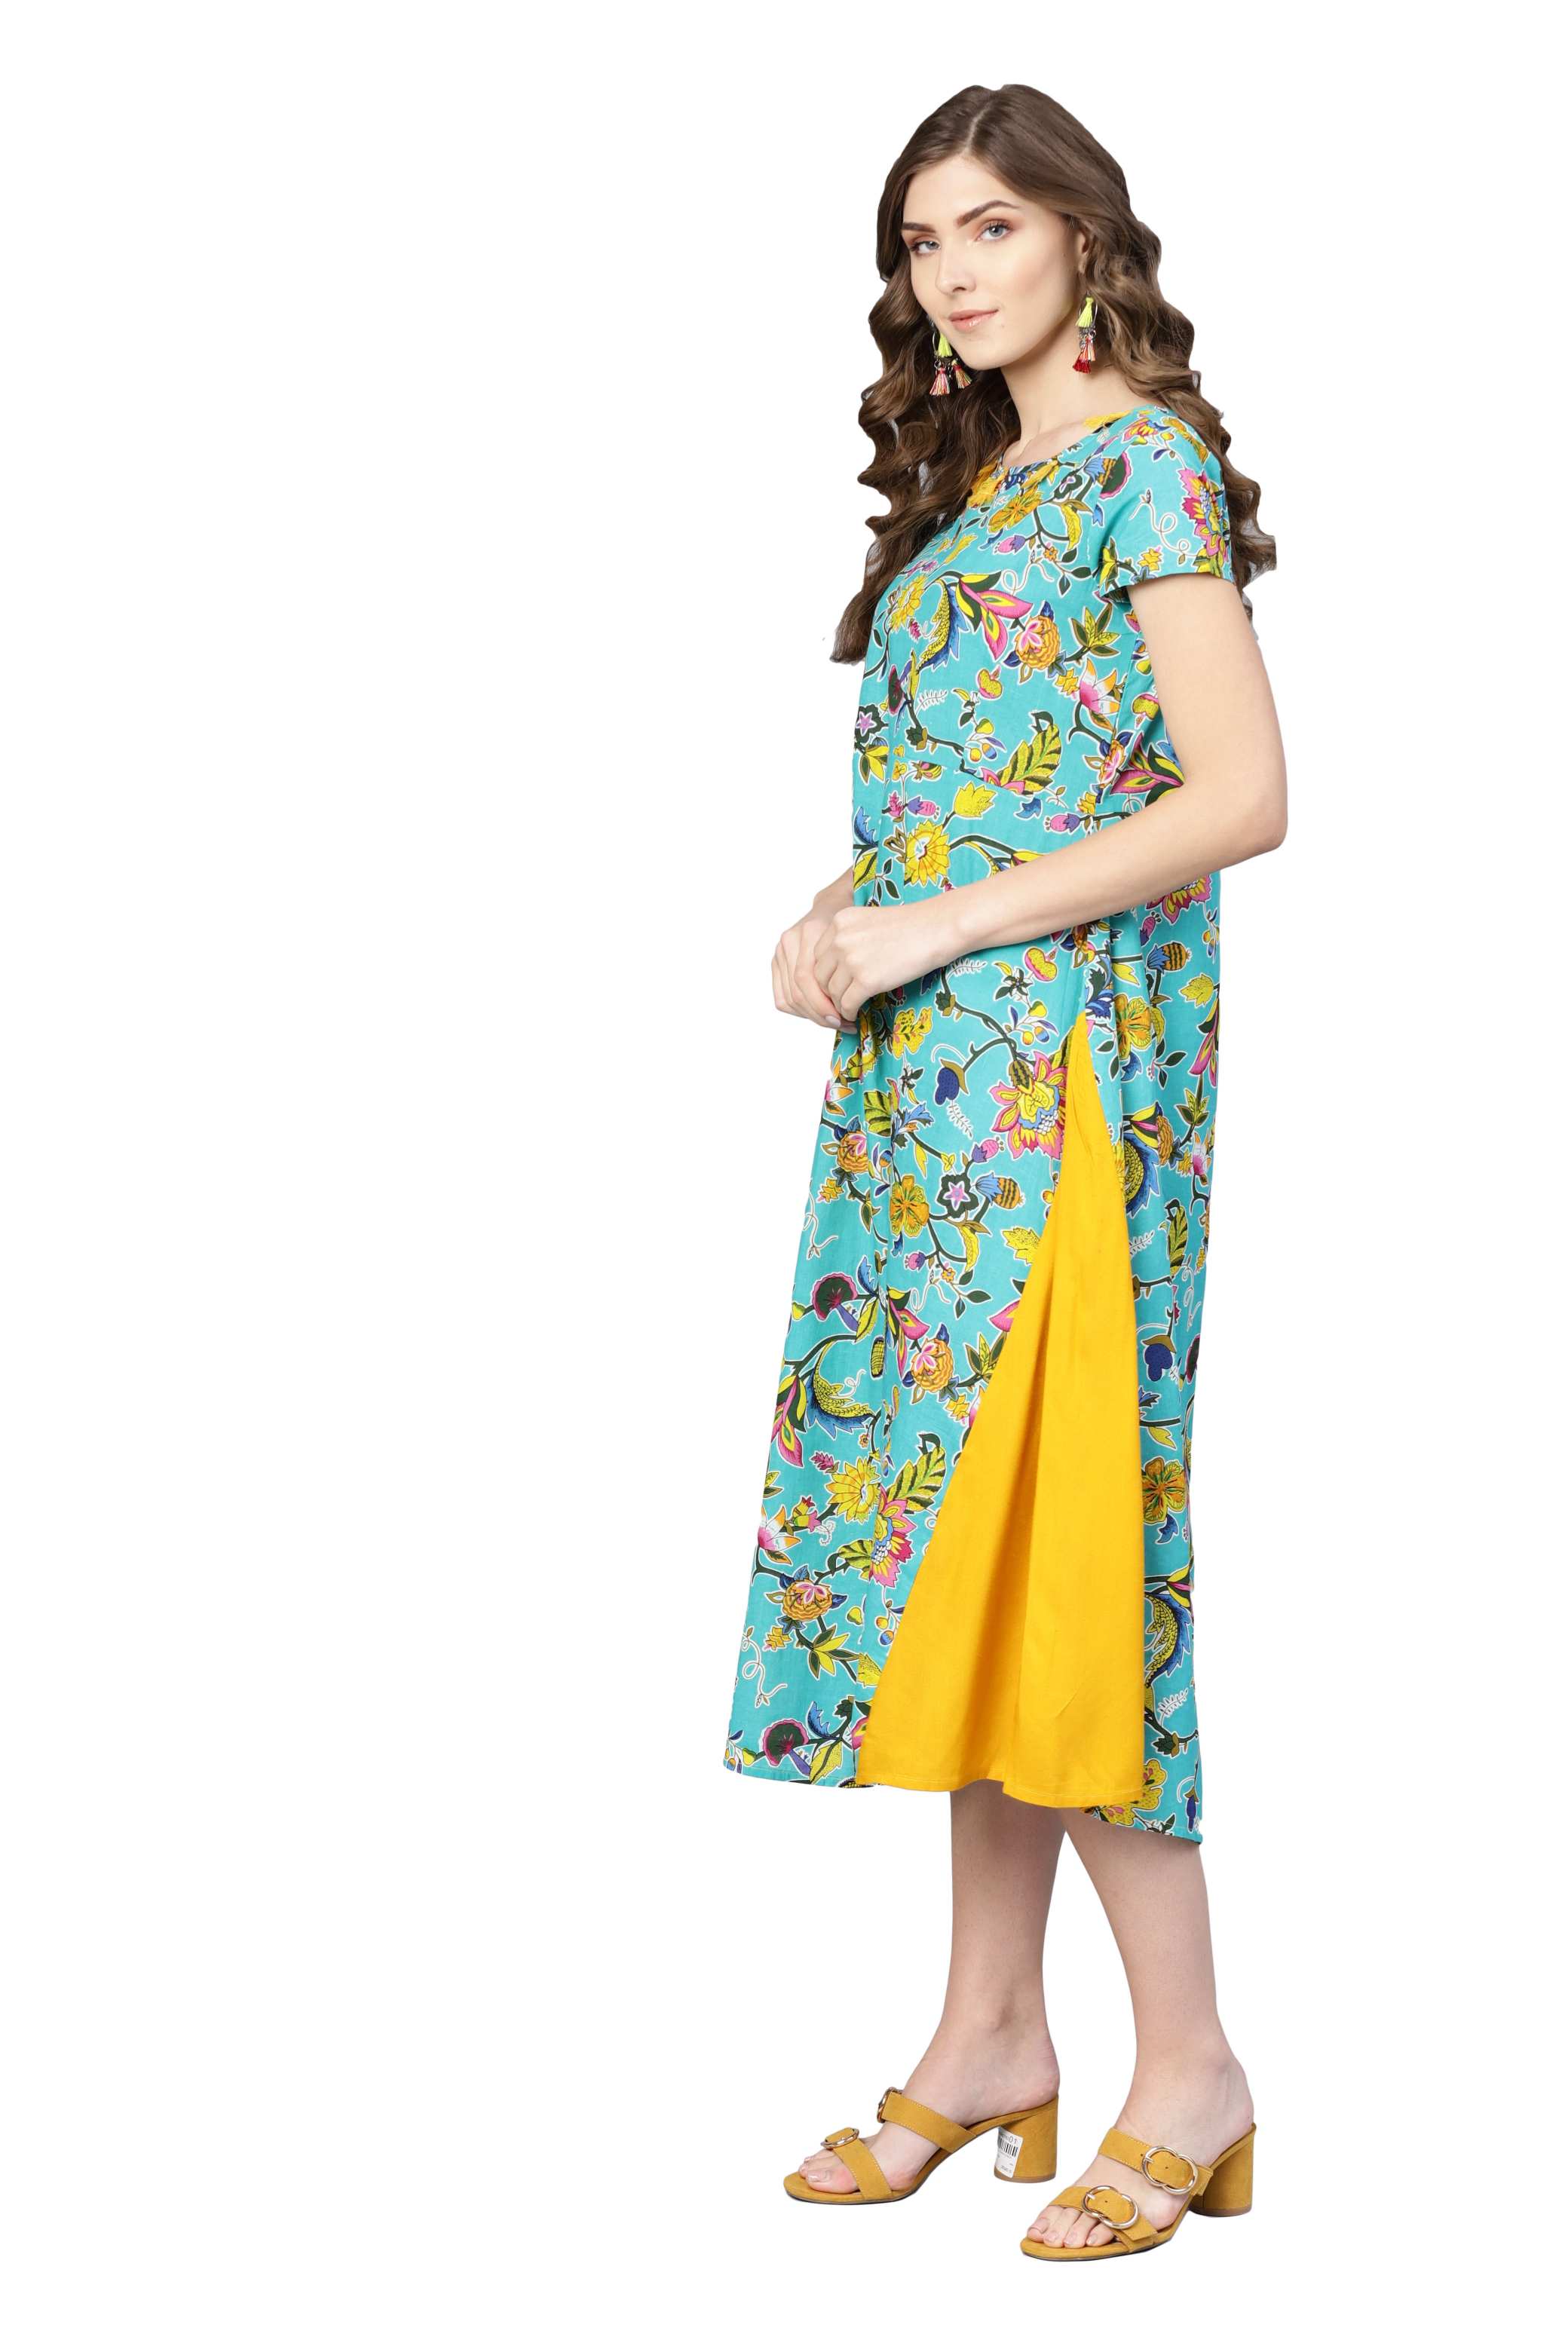 Women's Multi Cotton Printed  Round Neck Dress - Final Clearance Sale